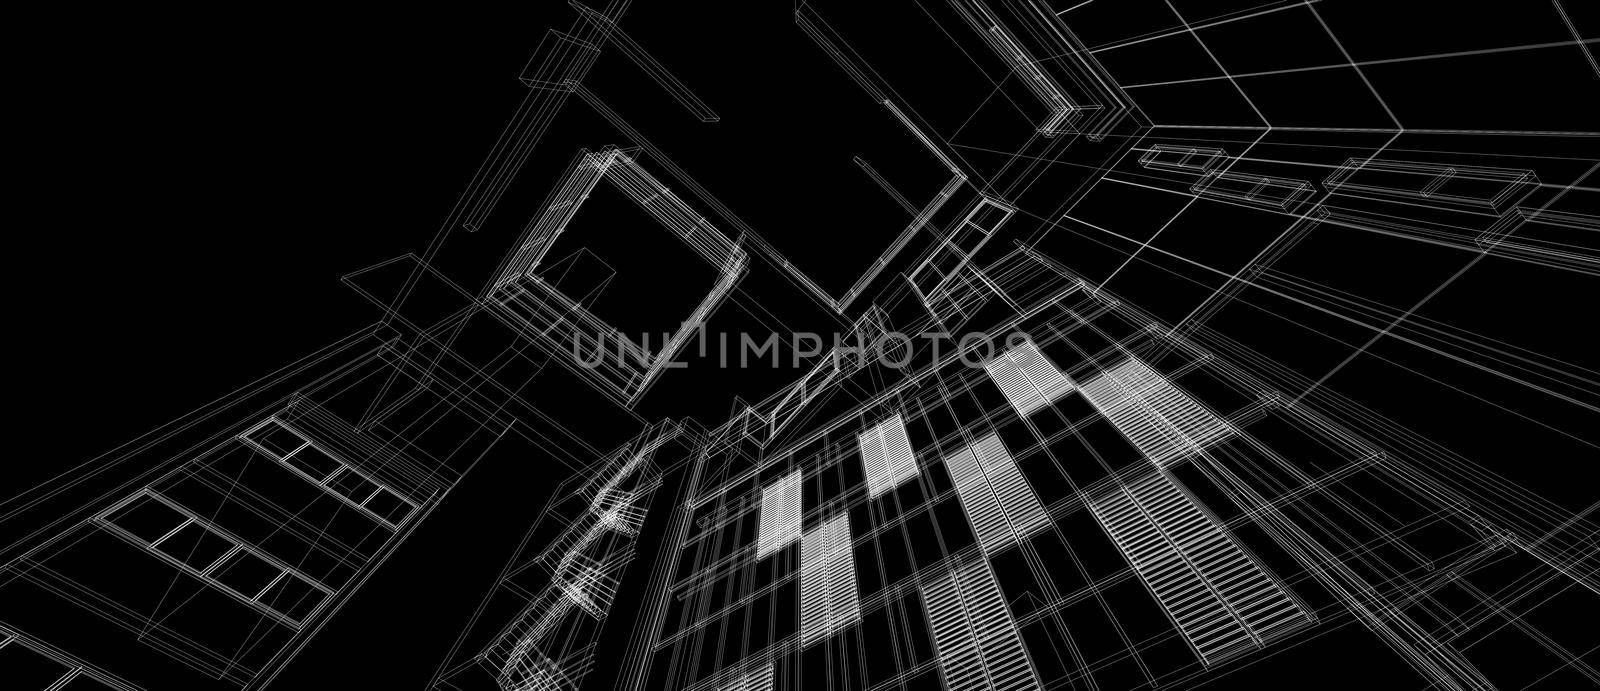 Architecture building space design concept 3d perspective white wire frame rendering black background. For abstract background or wallpaper desktops computer technology design architectural theme. by Petrichor